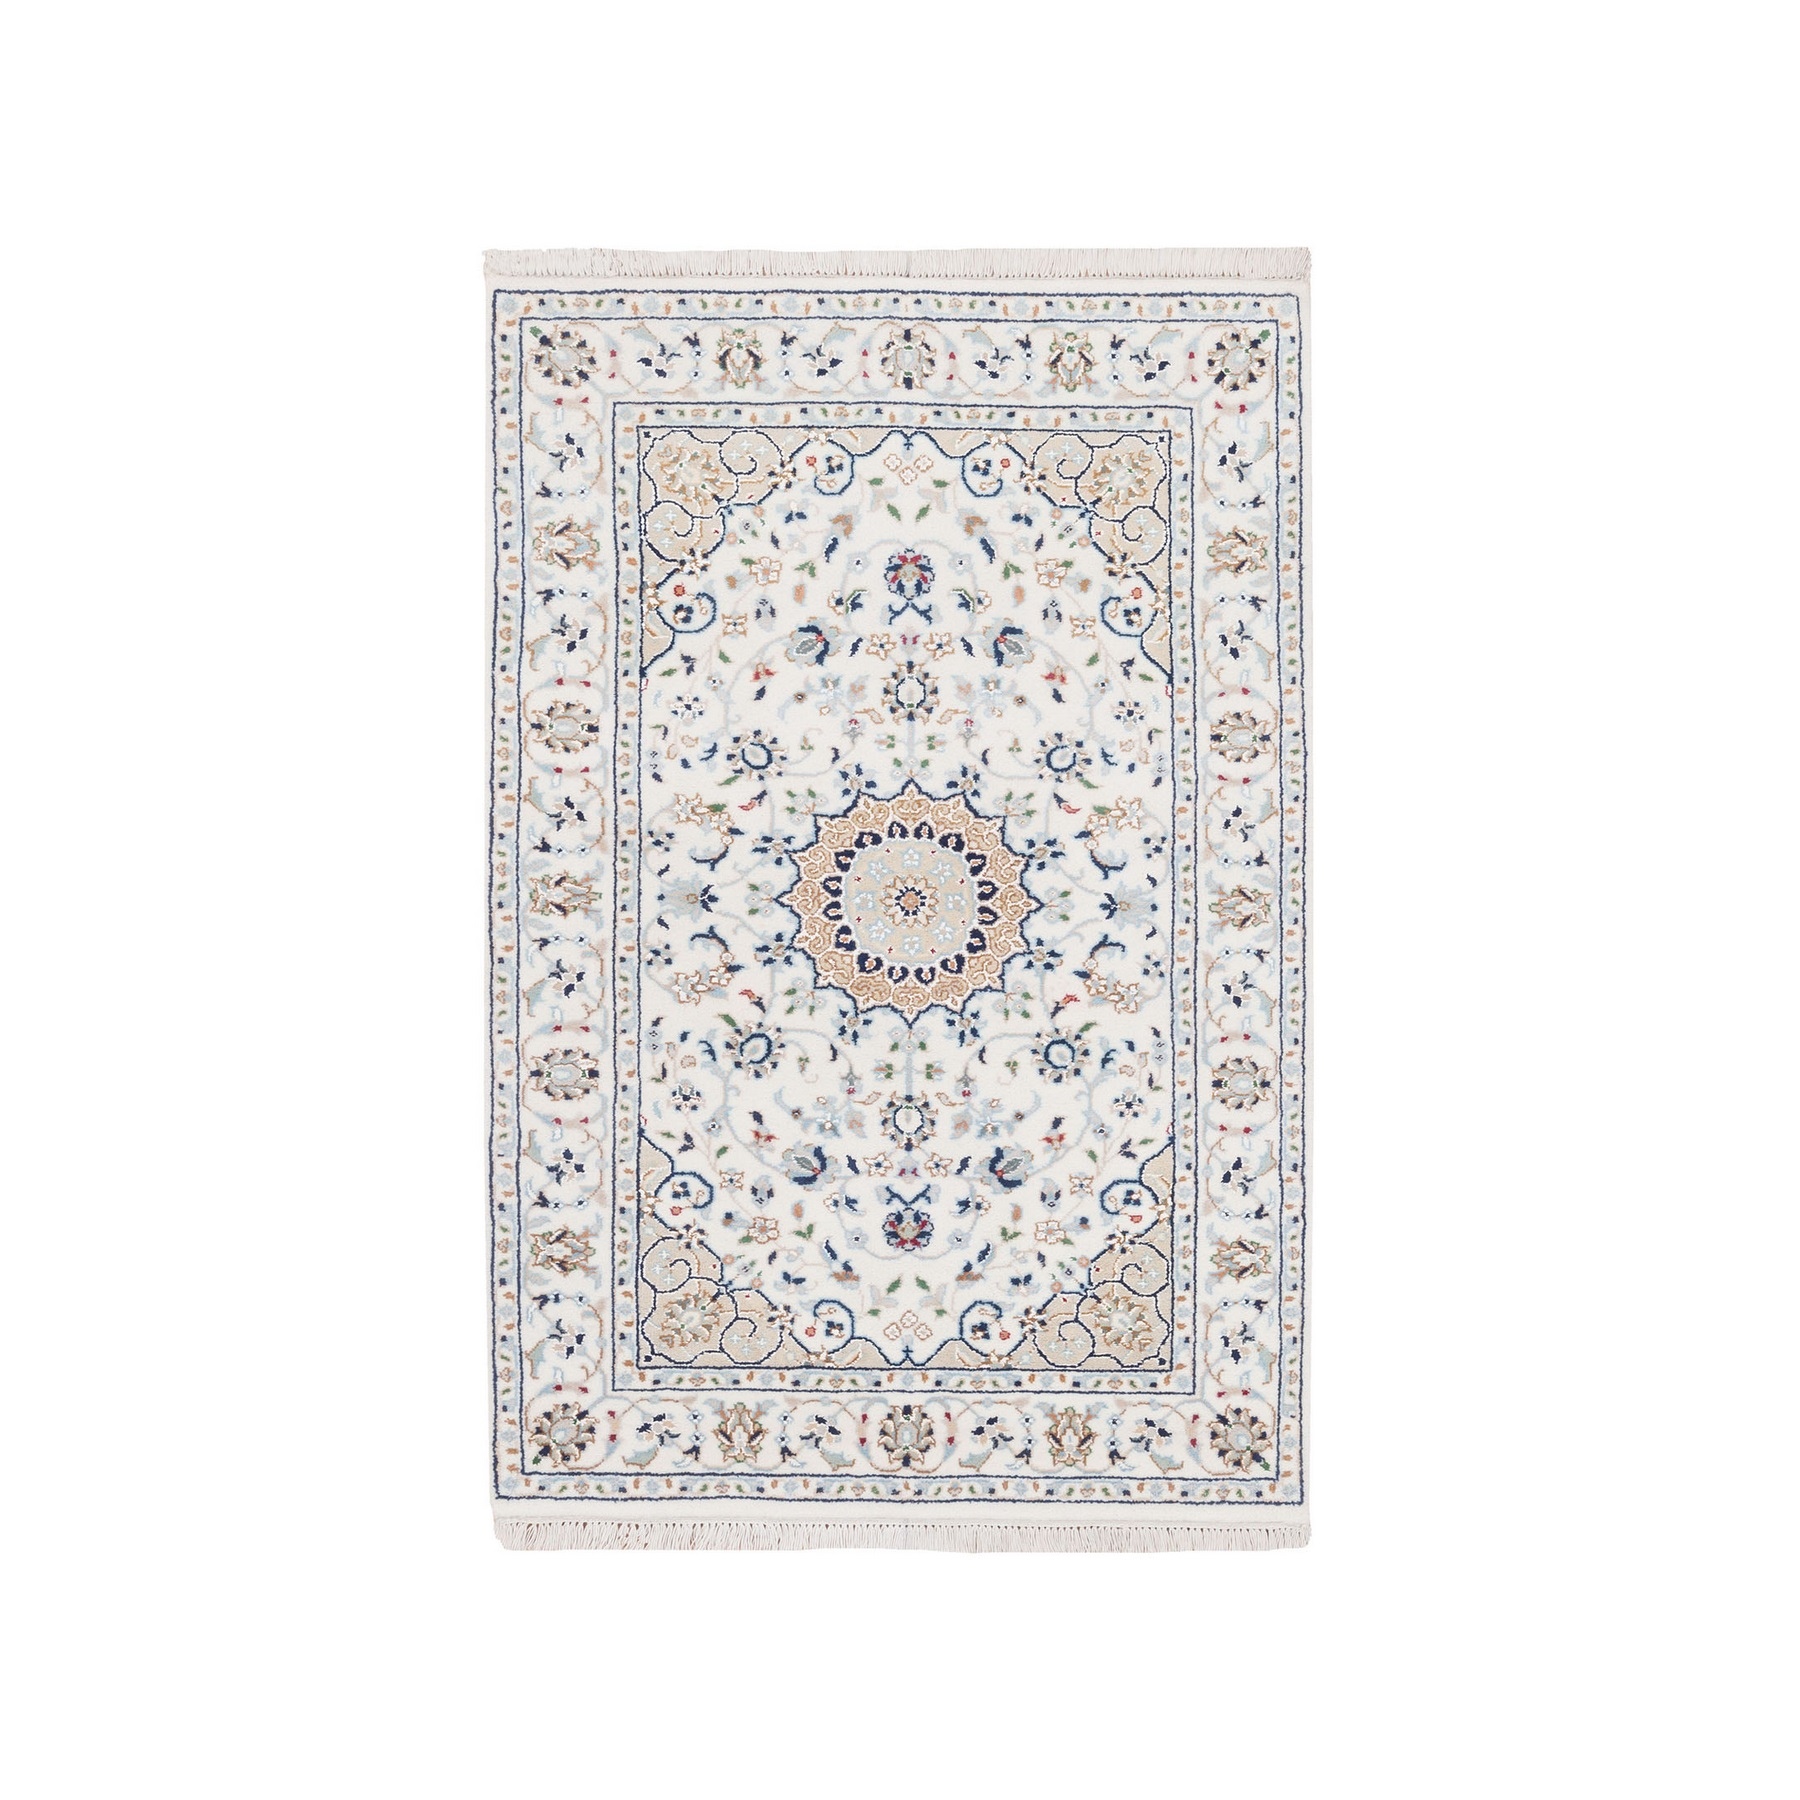 Pirniakan Collection Hand Knotted Ivory Rug No: 1125612